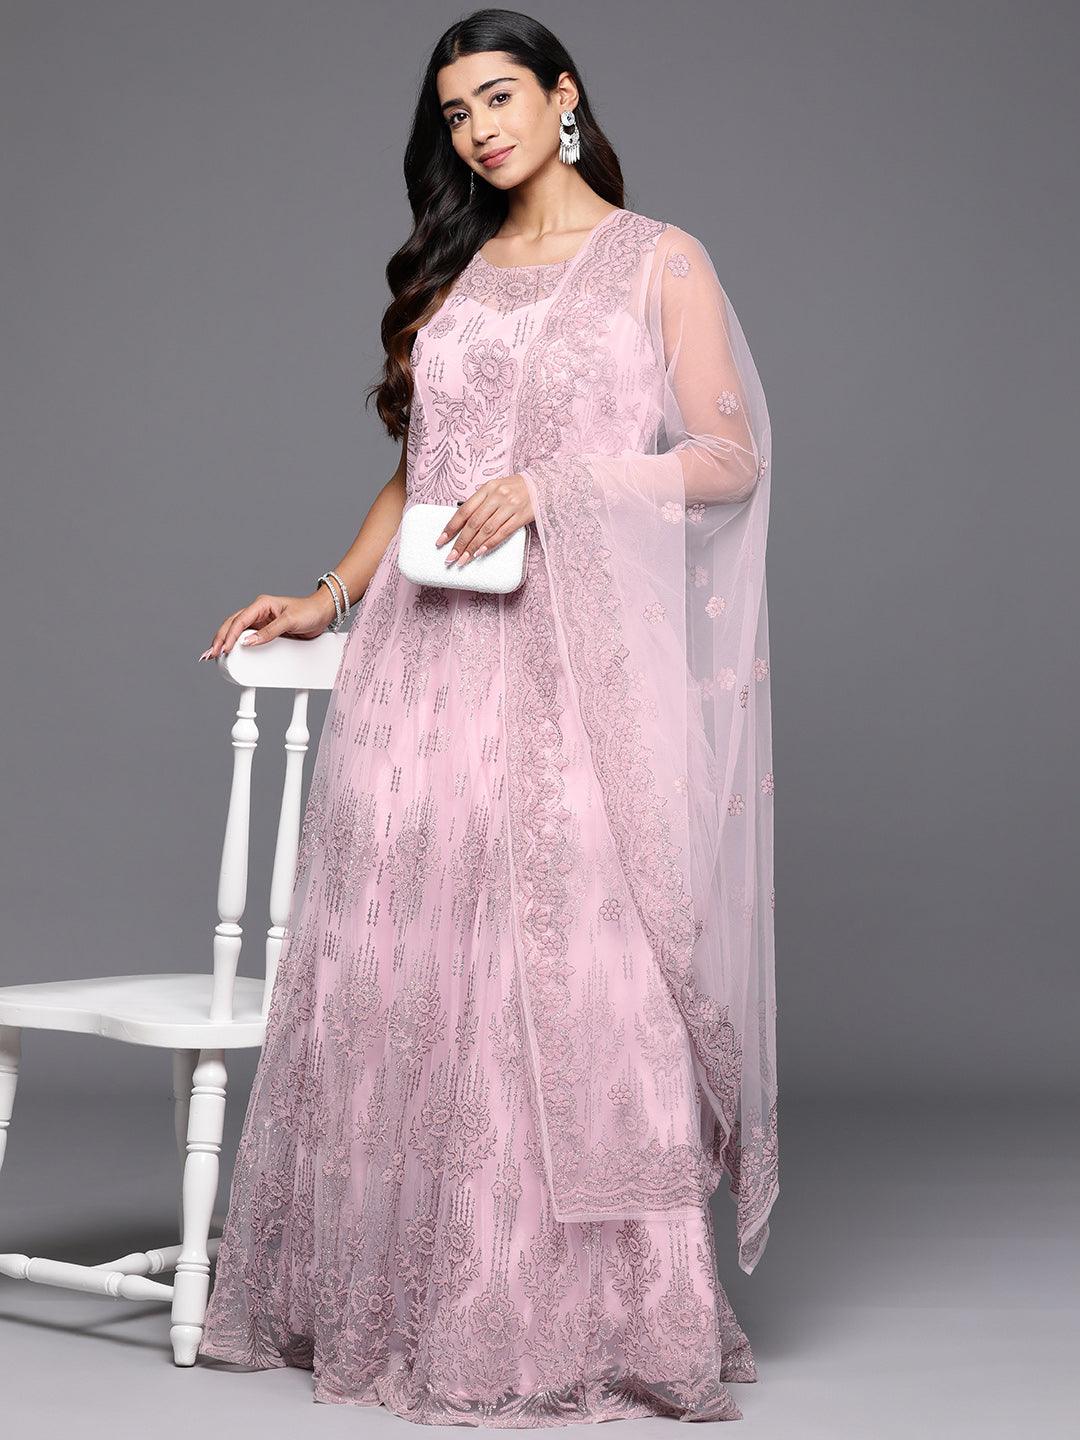 Achieve the Simple Bridal Look with Modish Ethnic Silhouettes